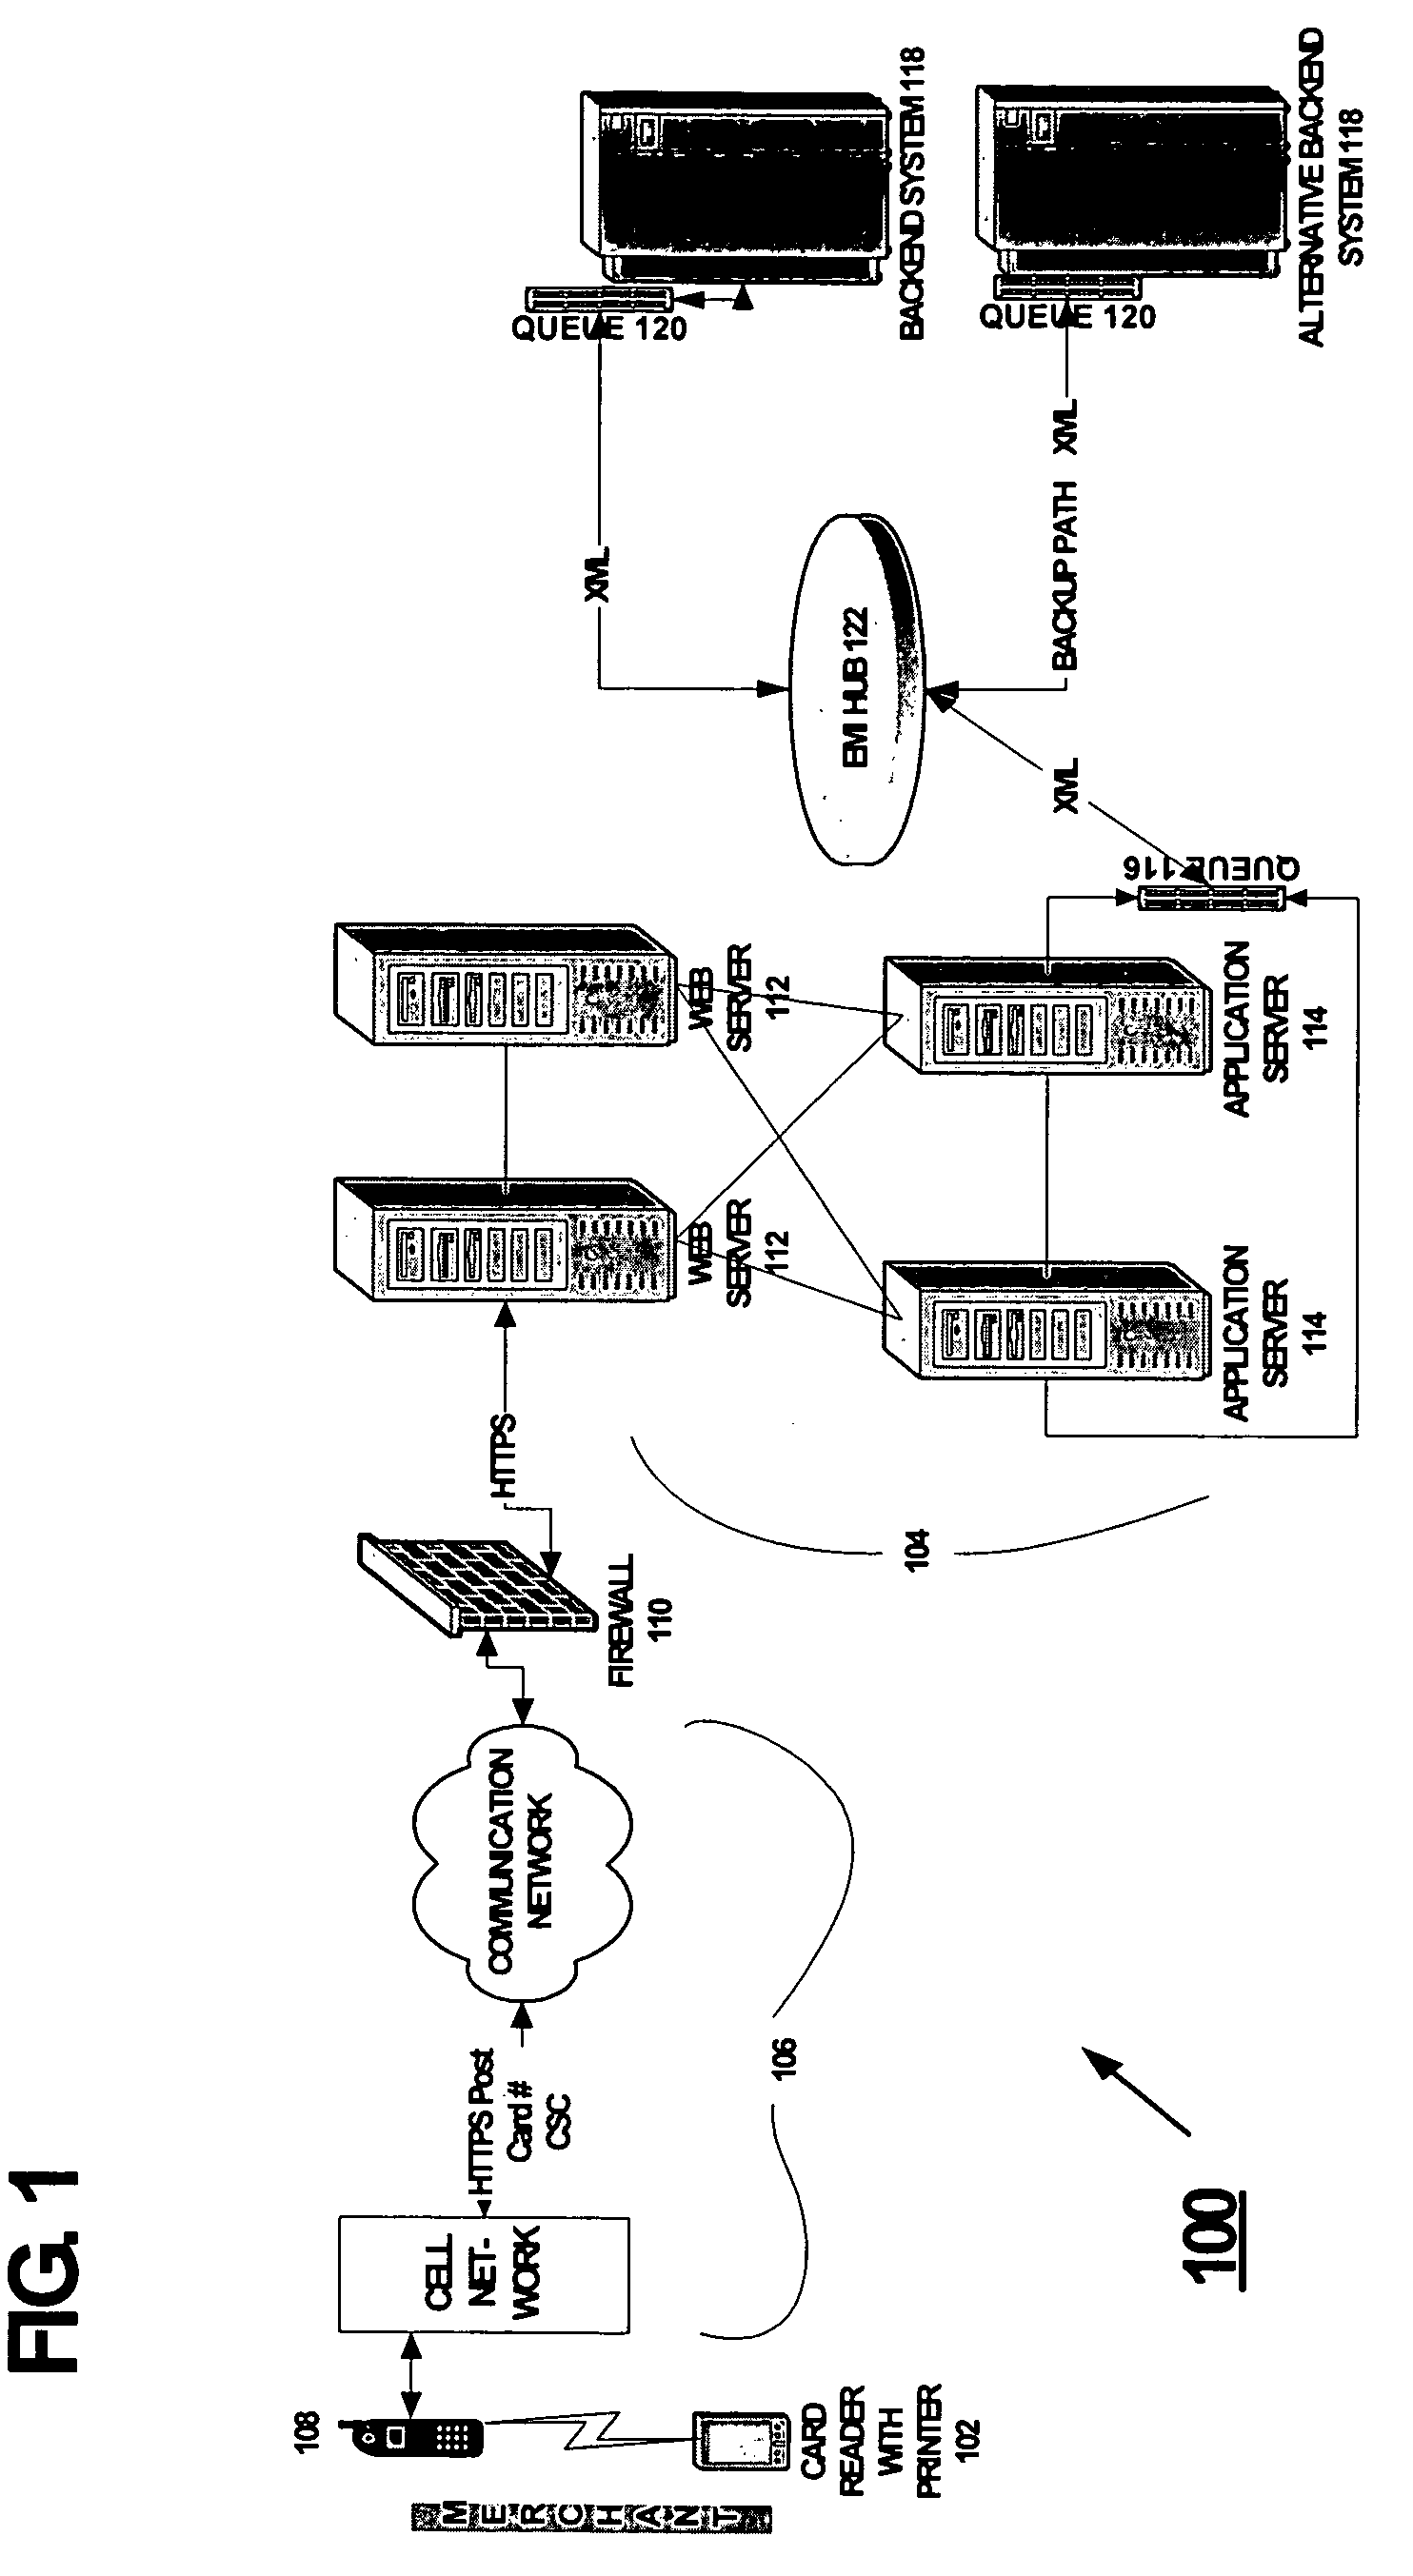 System and method for utilizing a mobile device to obtain a balance on a financial transaction instrument